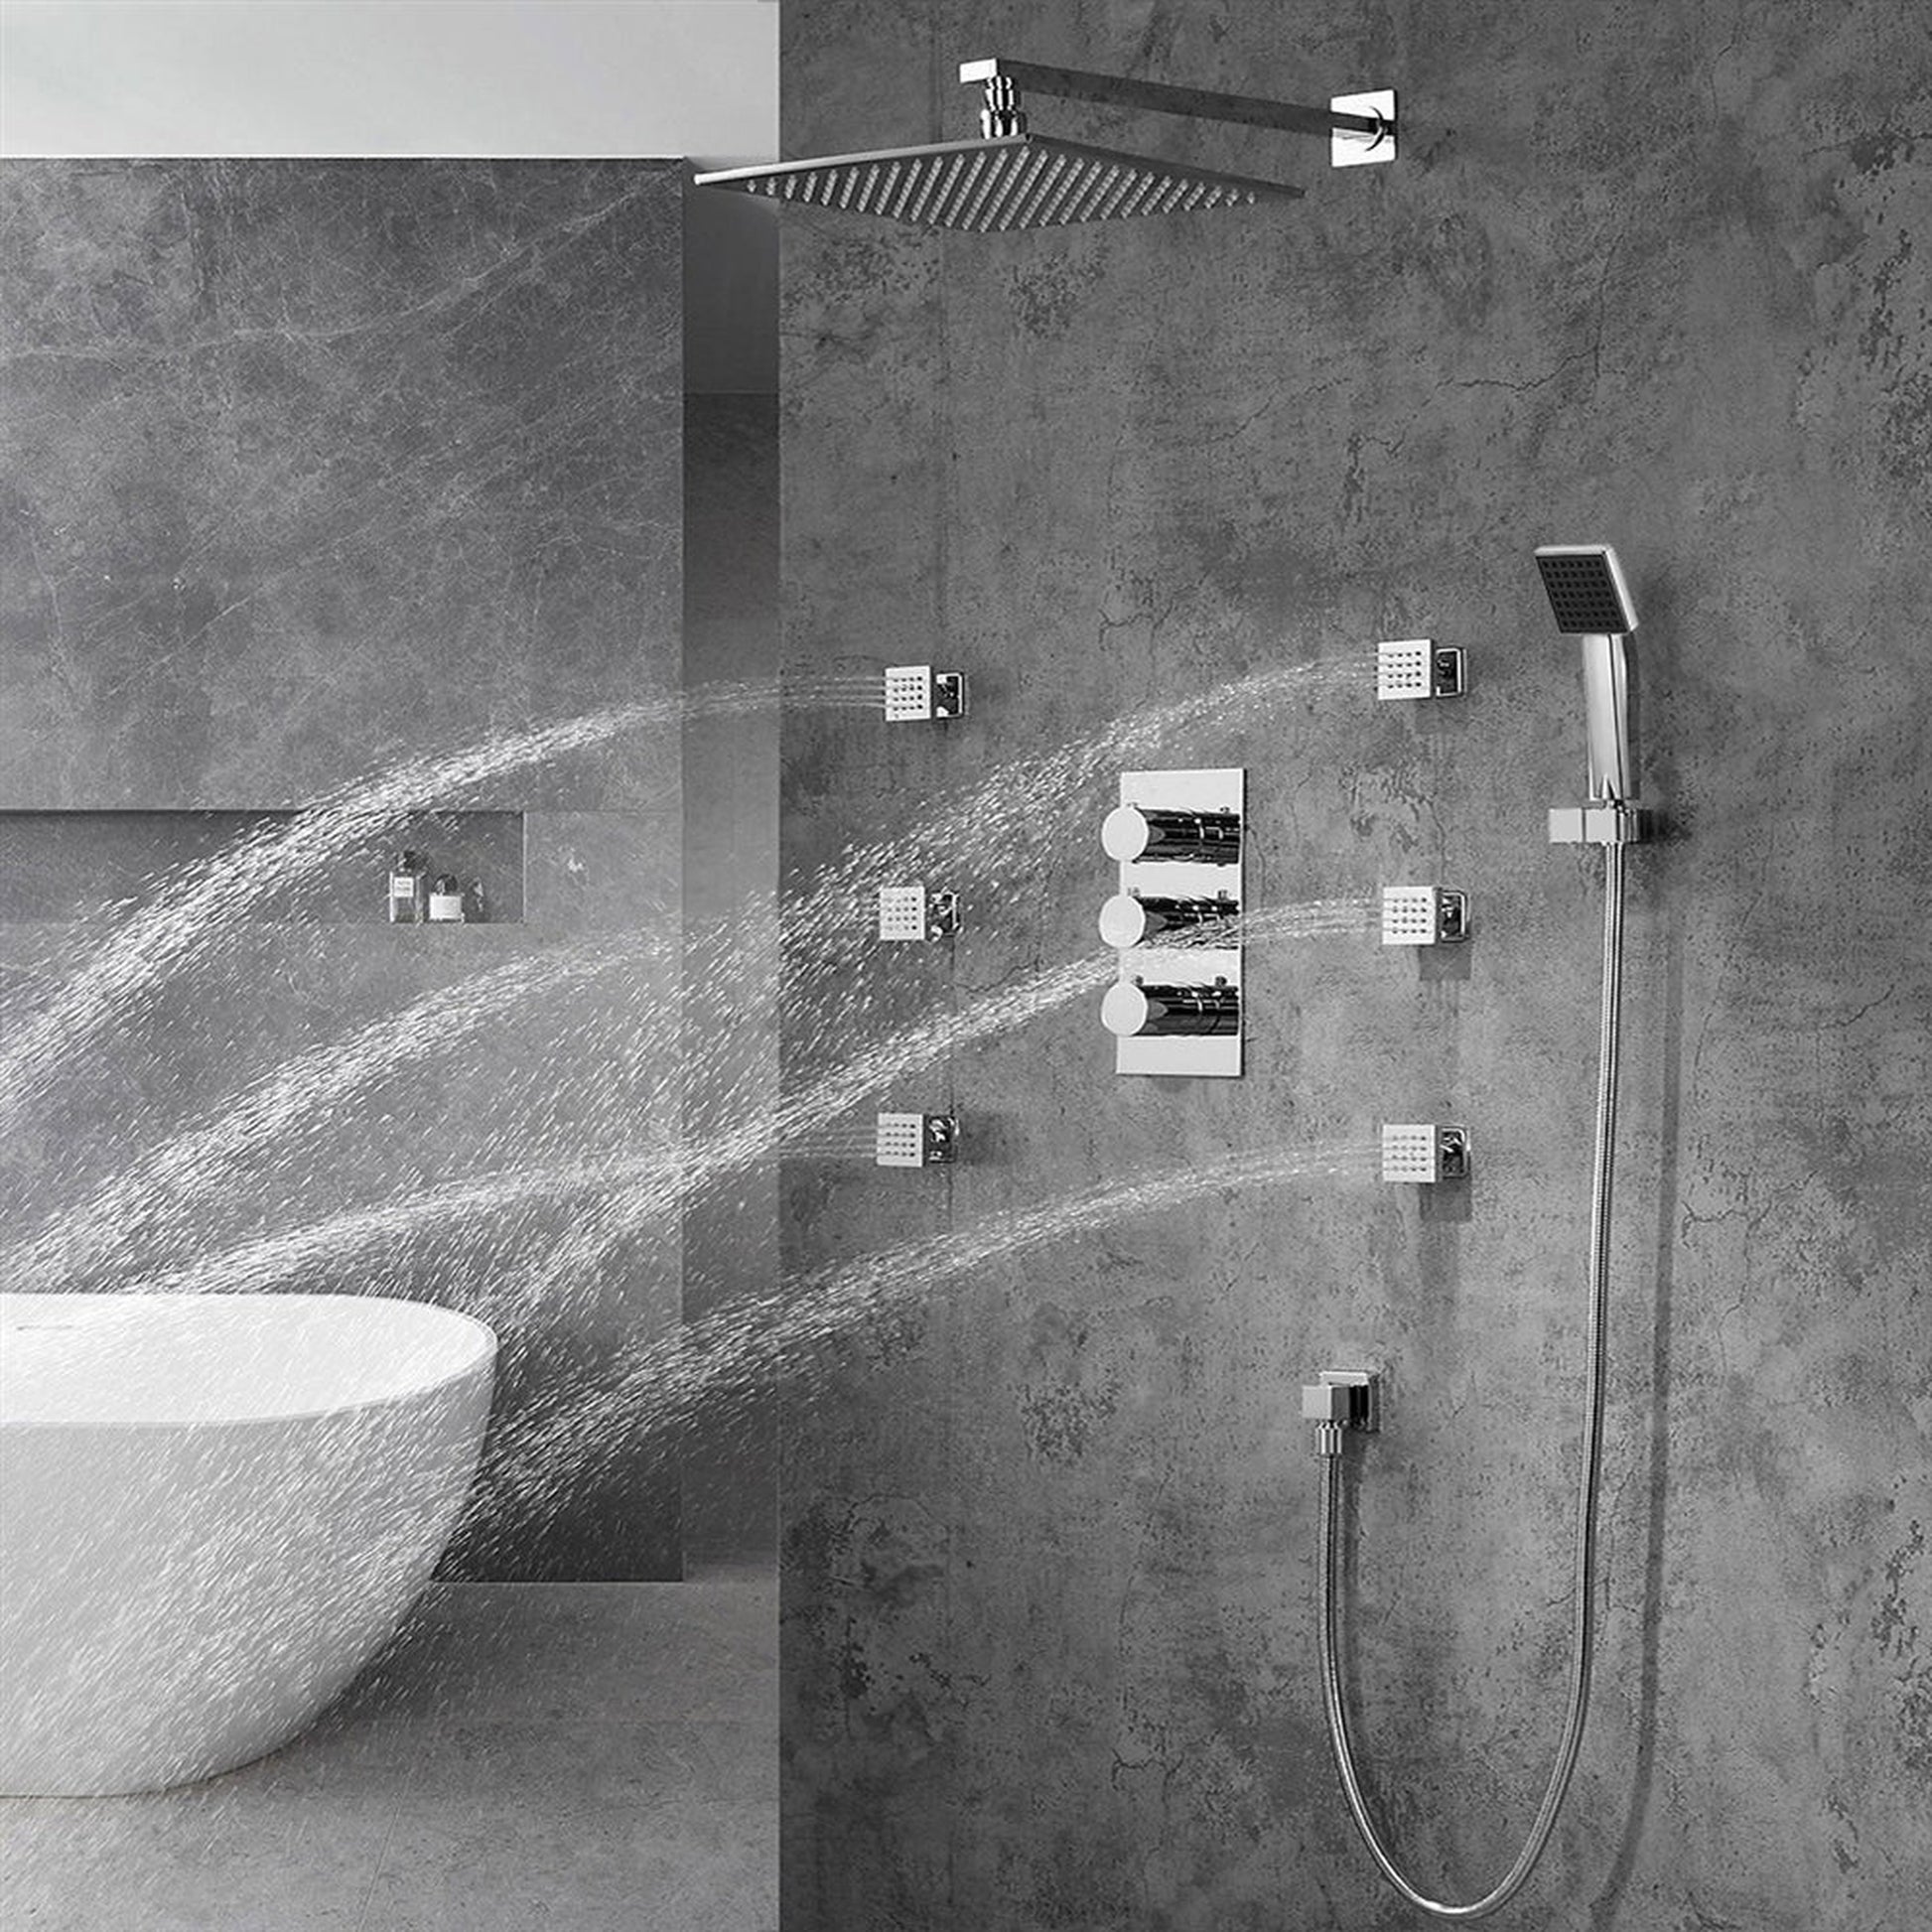 Fontana Trialo 10" Polished Chrome Round Wall-Mounted Color Changing LED Shower System With Thermostatic Mixer, Adjustable 6-Body Jets and Hand Shower